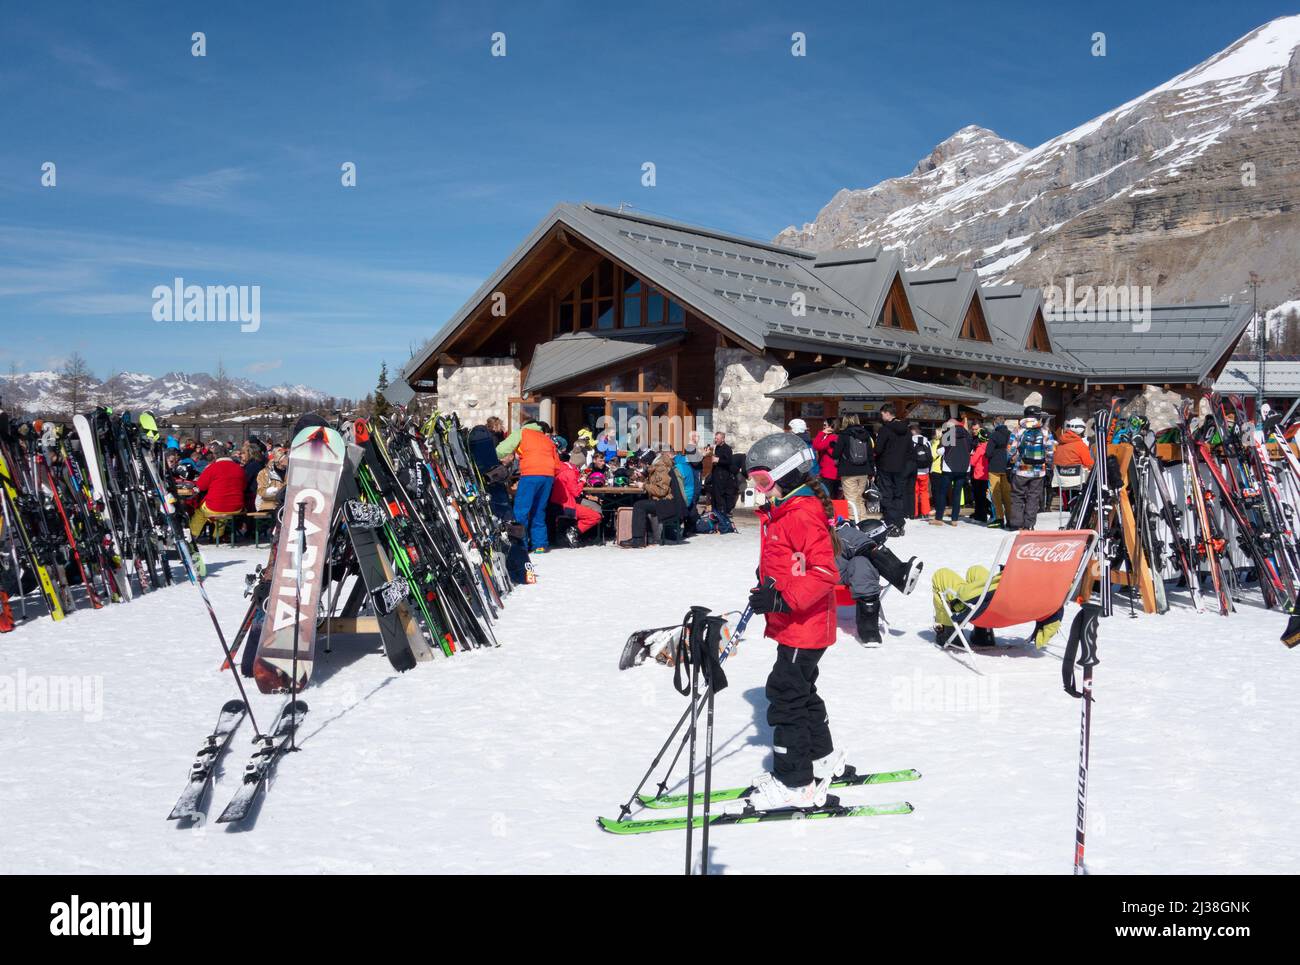 Child skiing at the Boch Cafe on the ski slopes for lunch, on a ski holiday, Madonna di Campiglio Dolomites Italy Europe Stock Photo